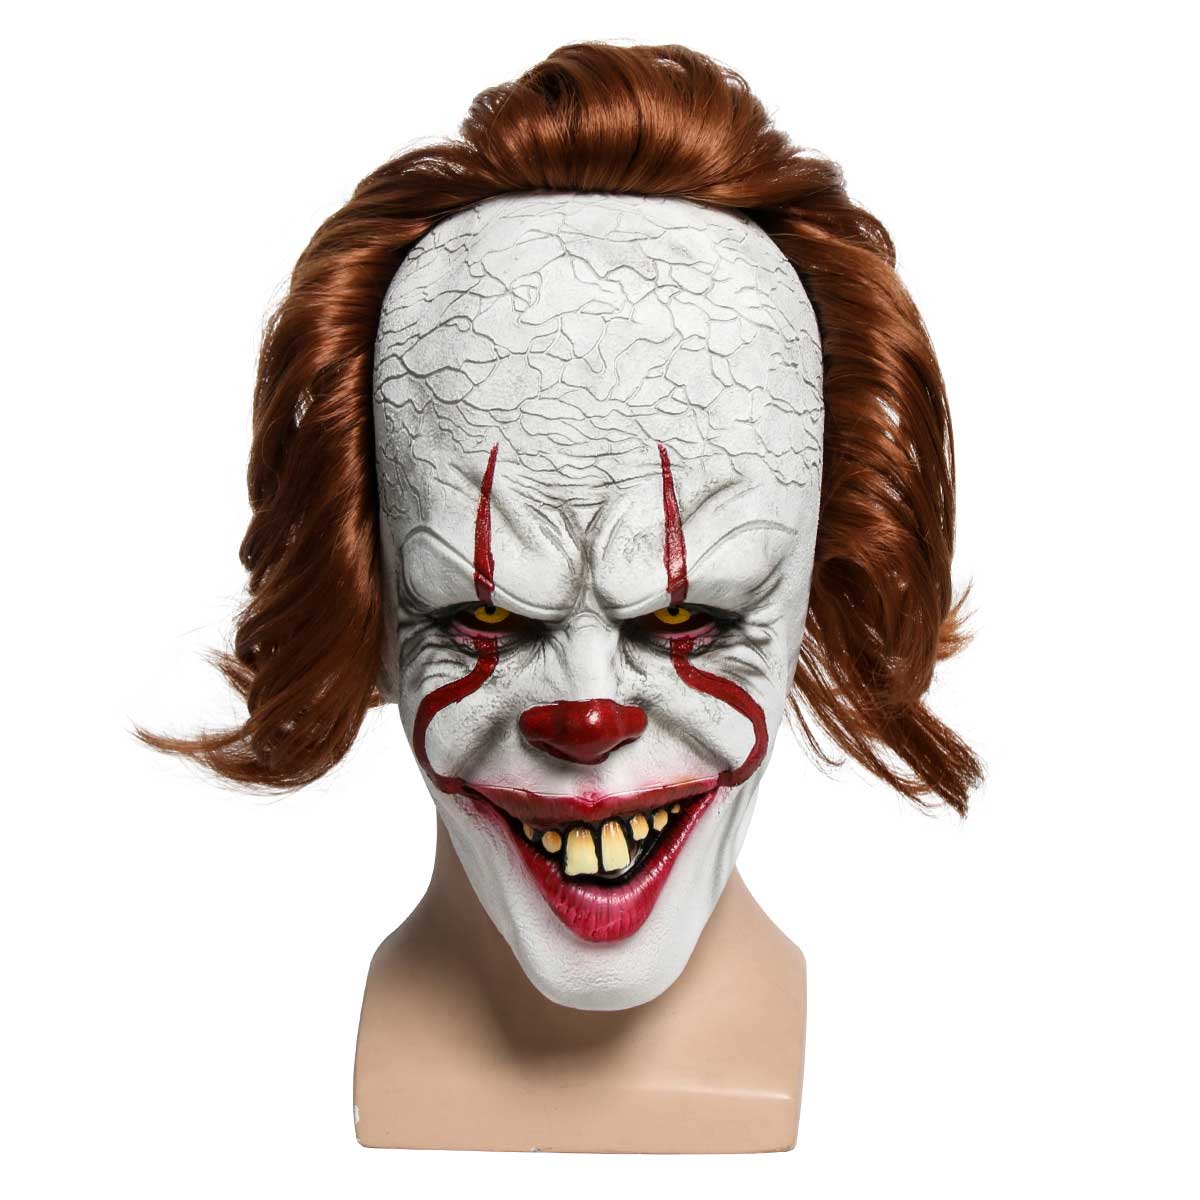 IT Capítulo 2 Pennywise Scary Halloween Cosplay Latex Mask Stephen King's TI Costume WIG